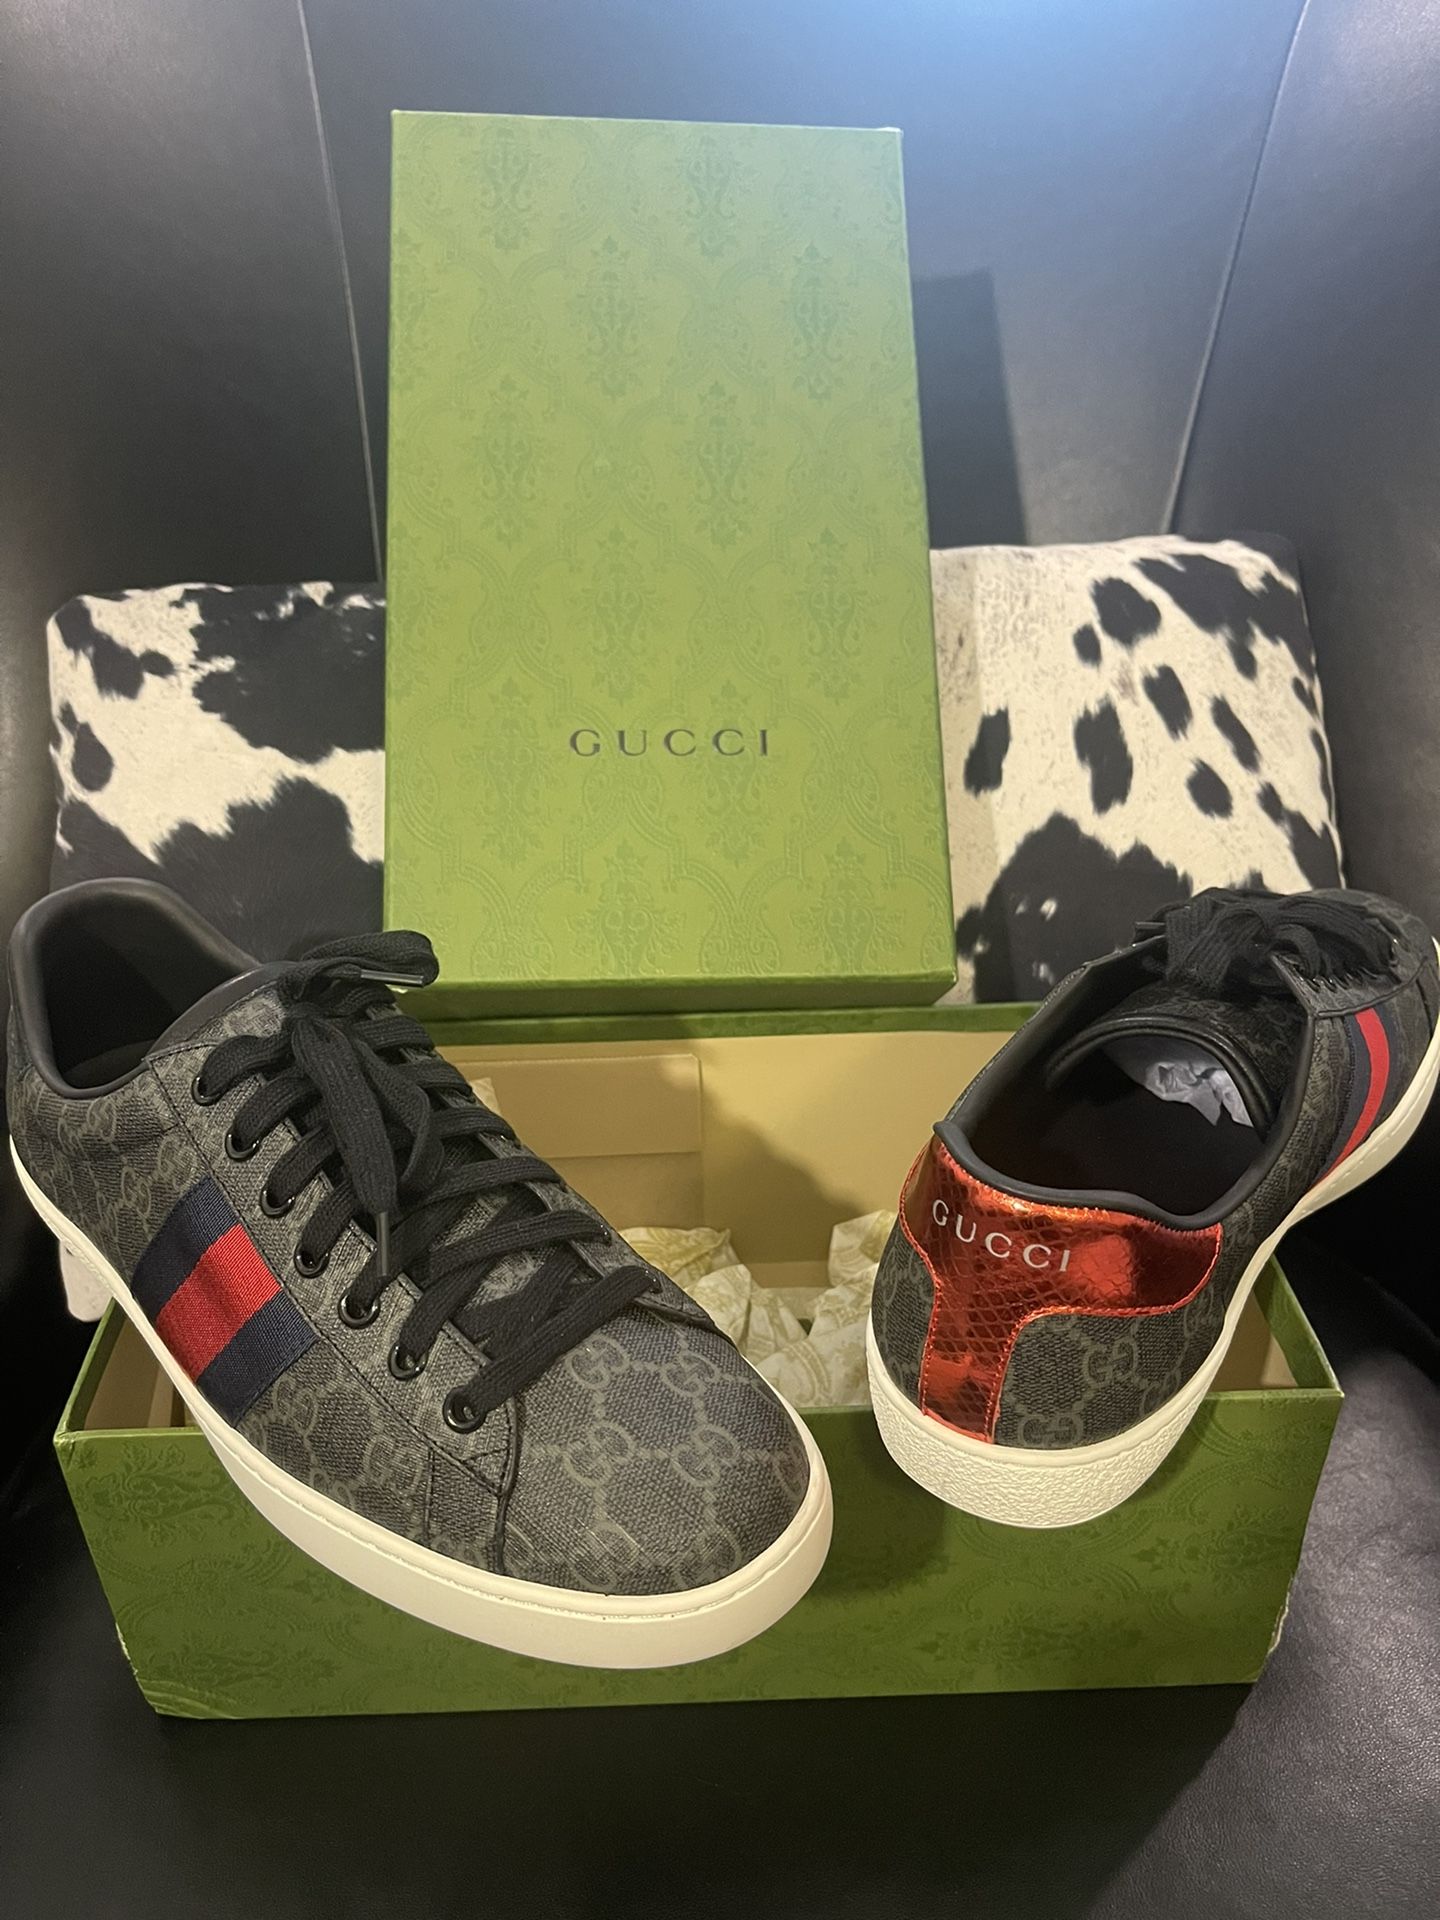 Gucci Black Canvas Ace GG Supreme Black Low Top-Price Is Firm